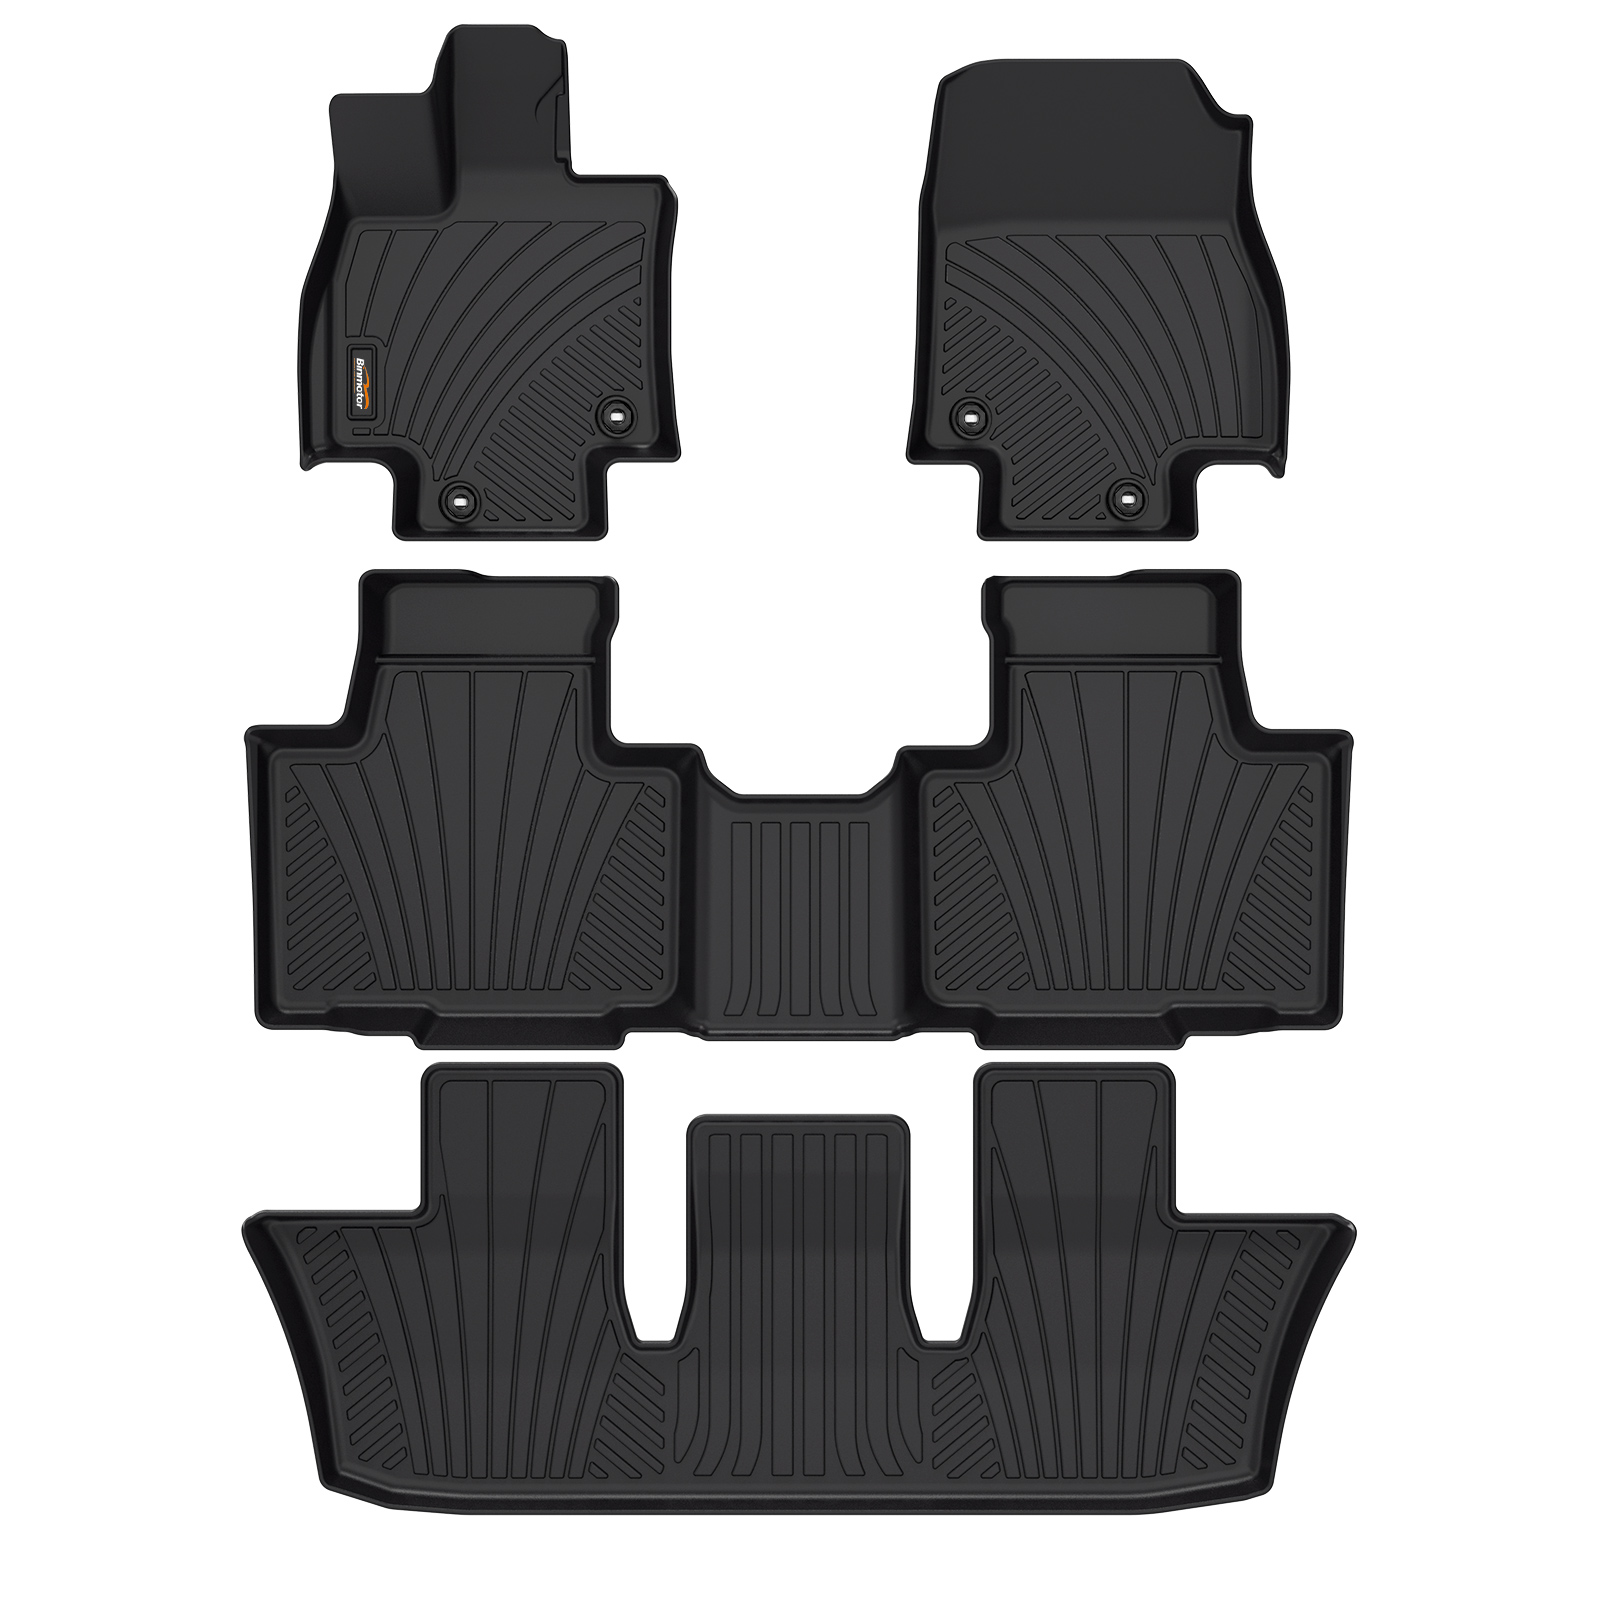 Binmotor-Floor Mats for Custom for Toyota Grand Highlander All Weather Protection TPE Anti-Slip Automotive Floor Liners, Fits 1st & 2nd & 3rd Row Full Set Accessories, Black（compatible year 2024）